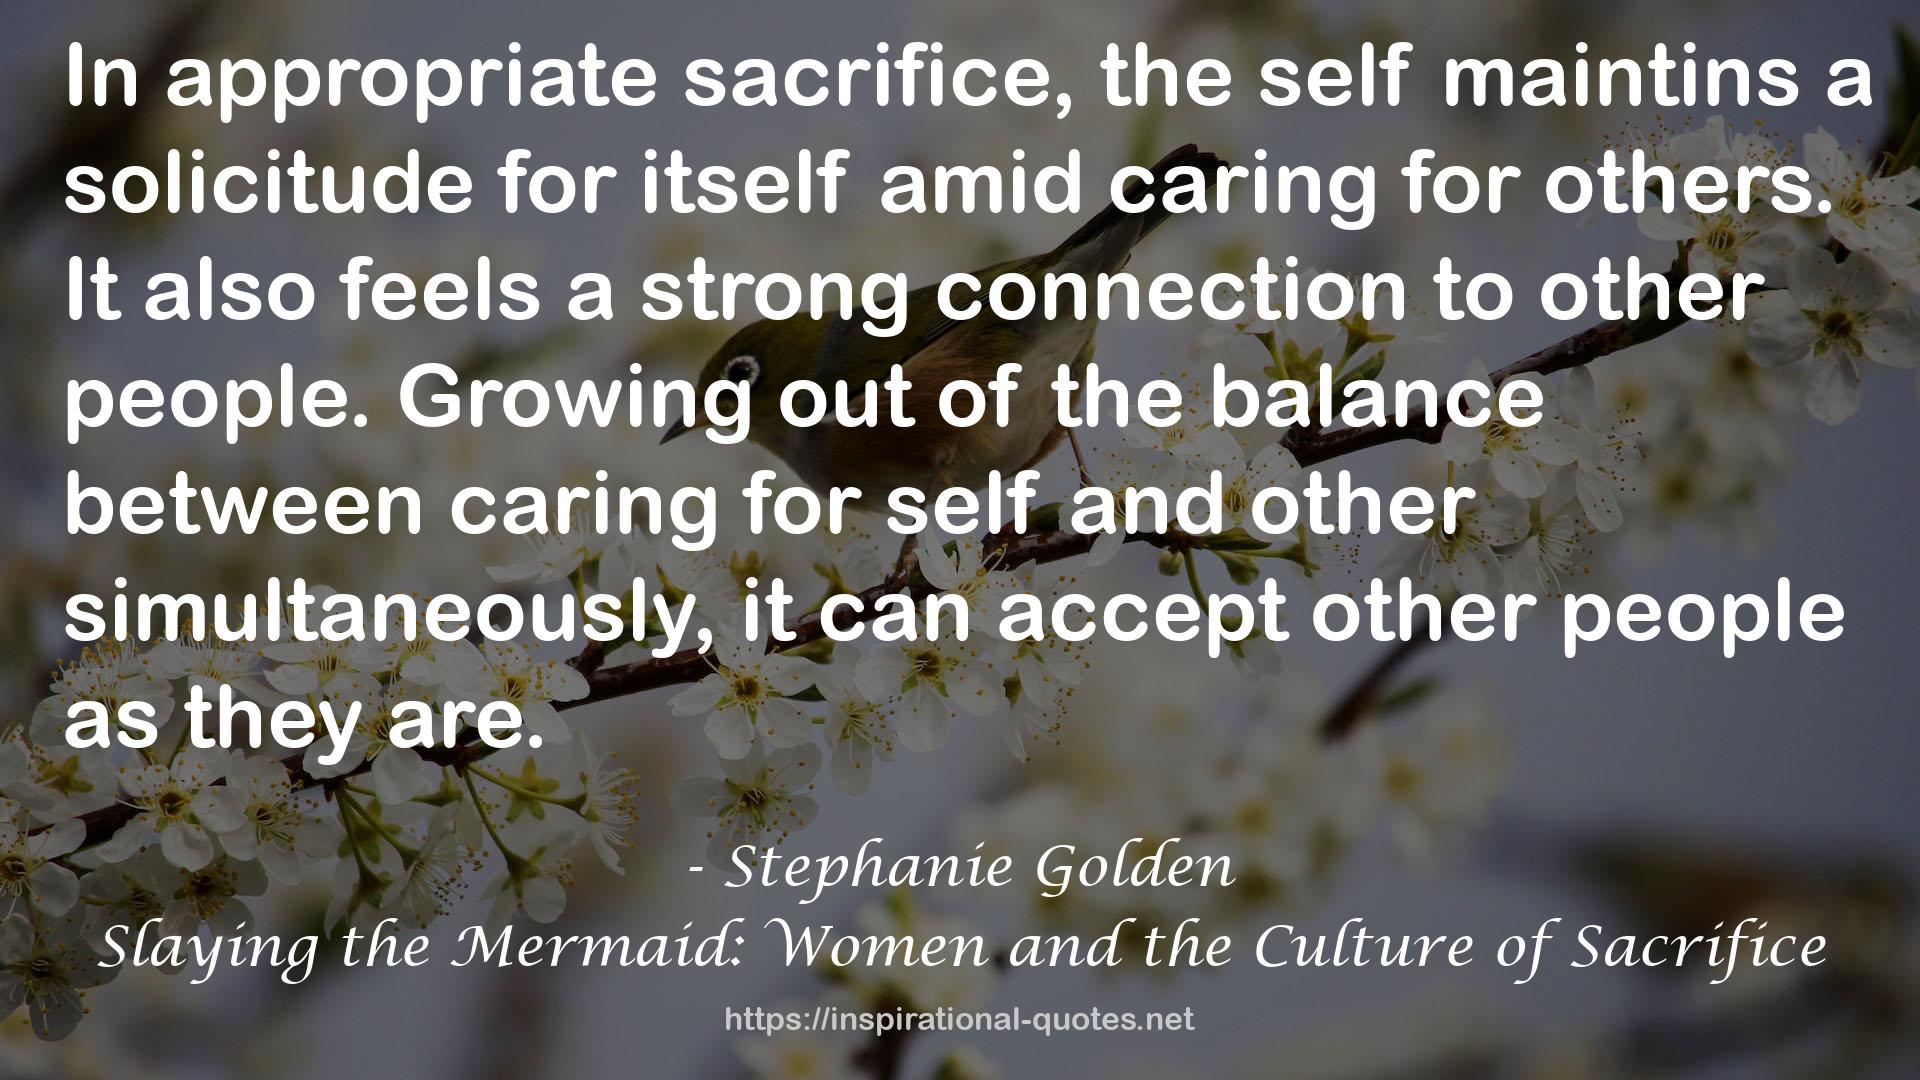 Slaying the Mermaid: Women and the Culture of Sacrifice QUOTES